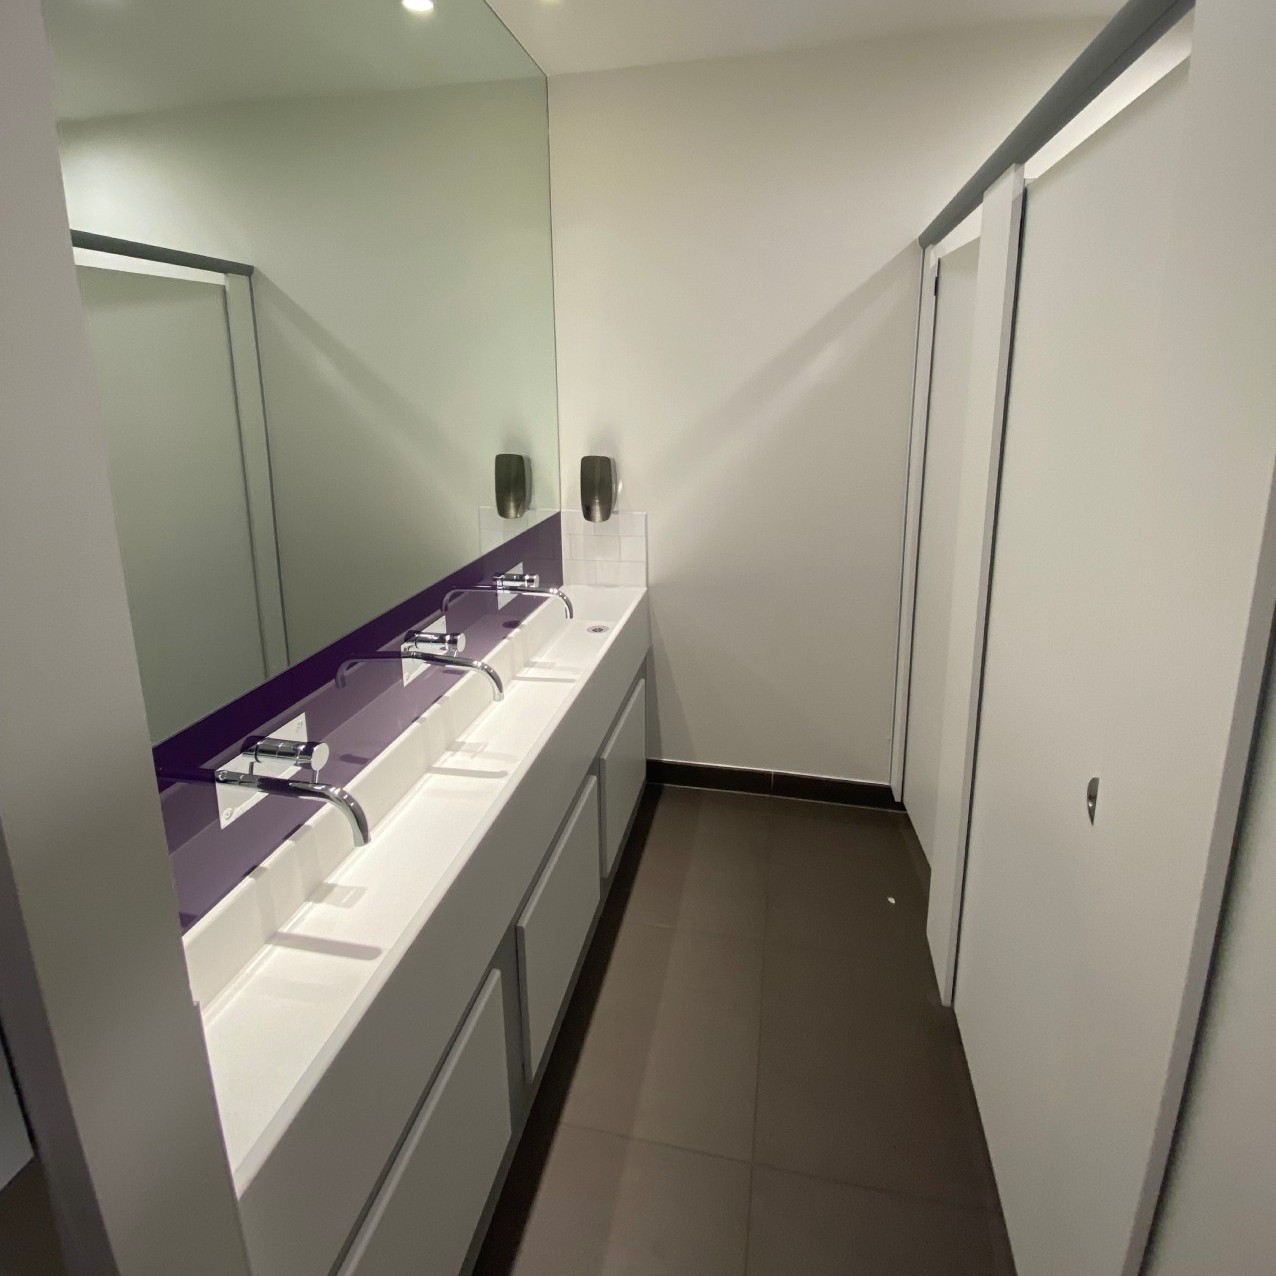 View of women's toilet showing sinks, mirror and cubicles